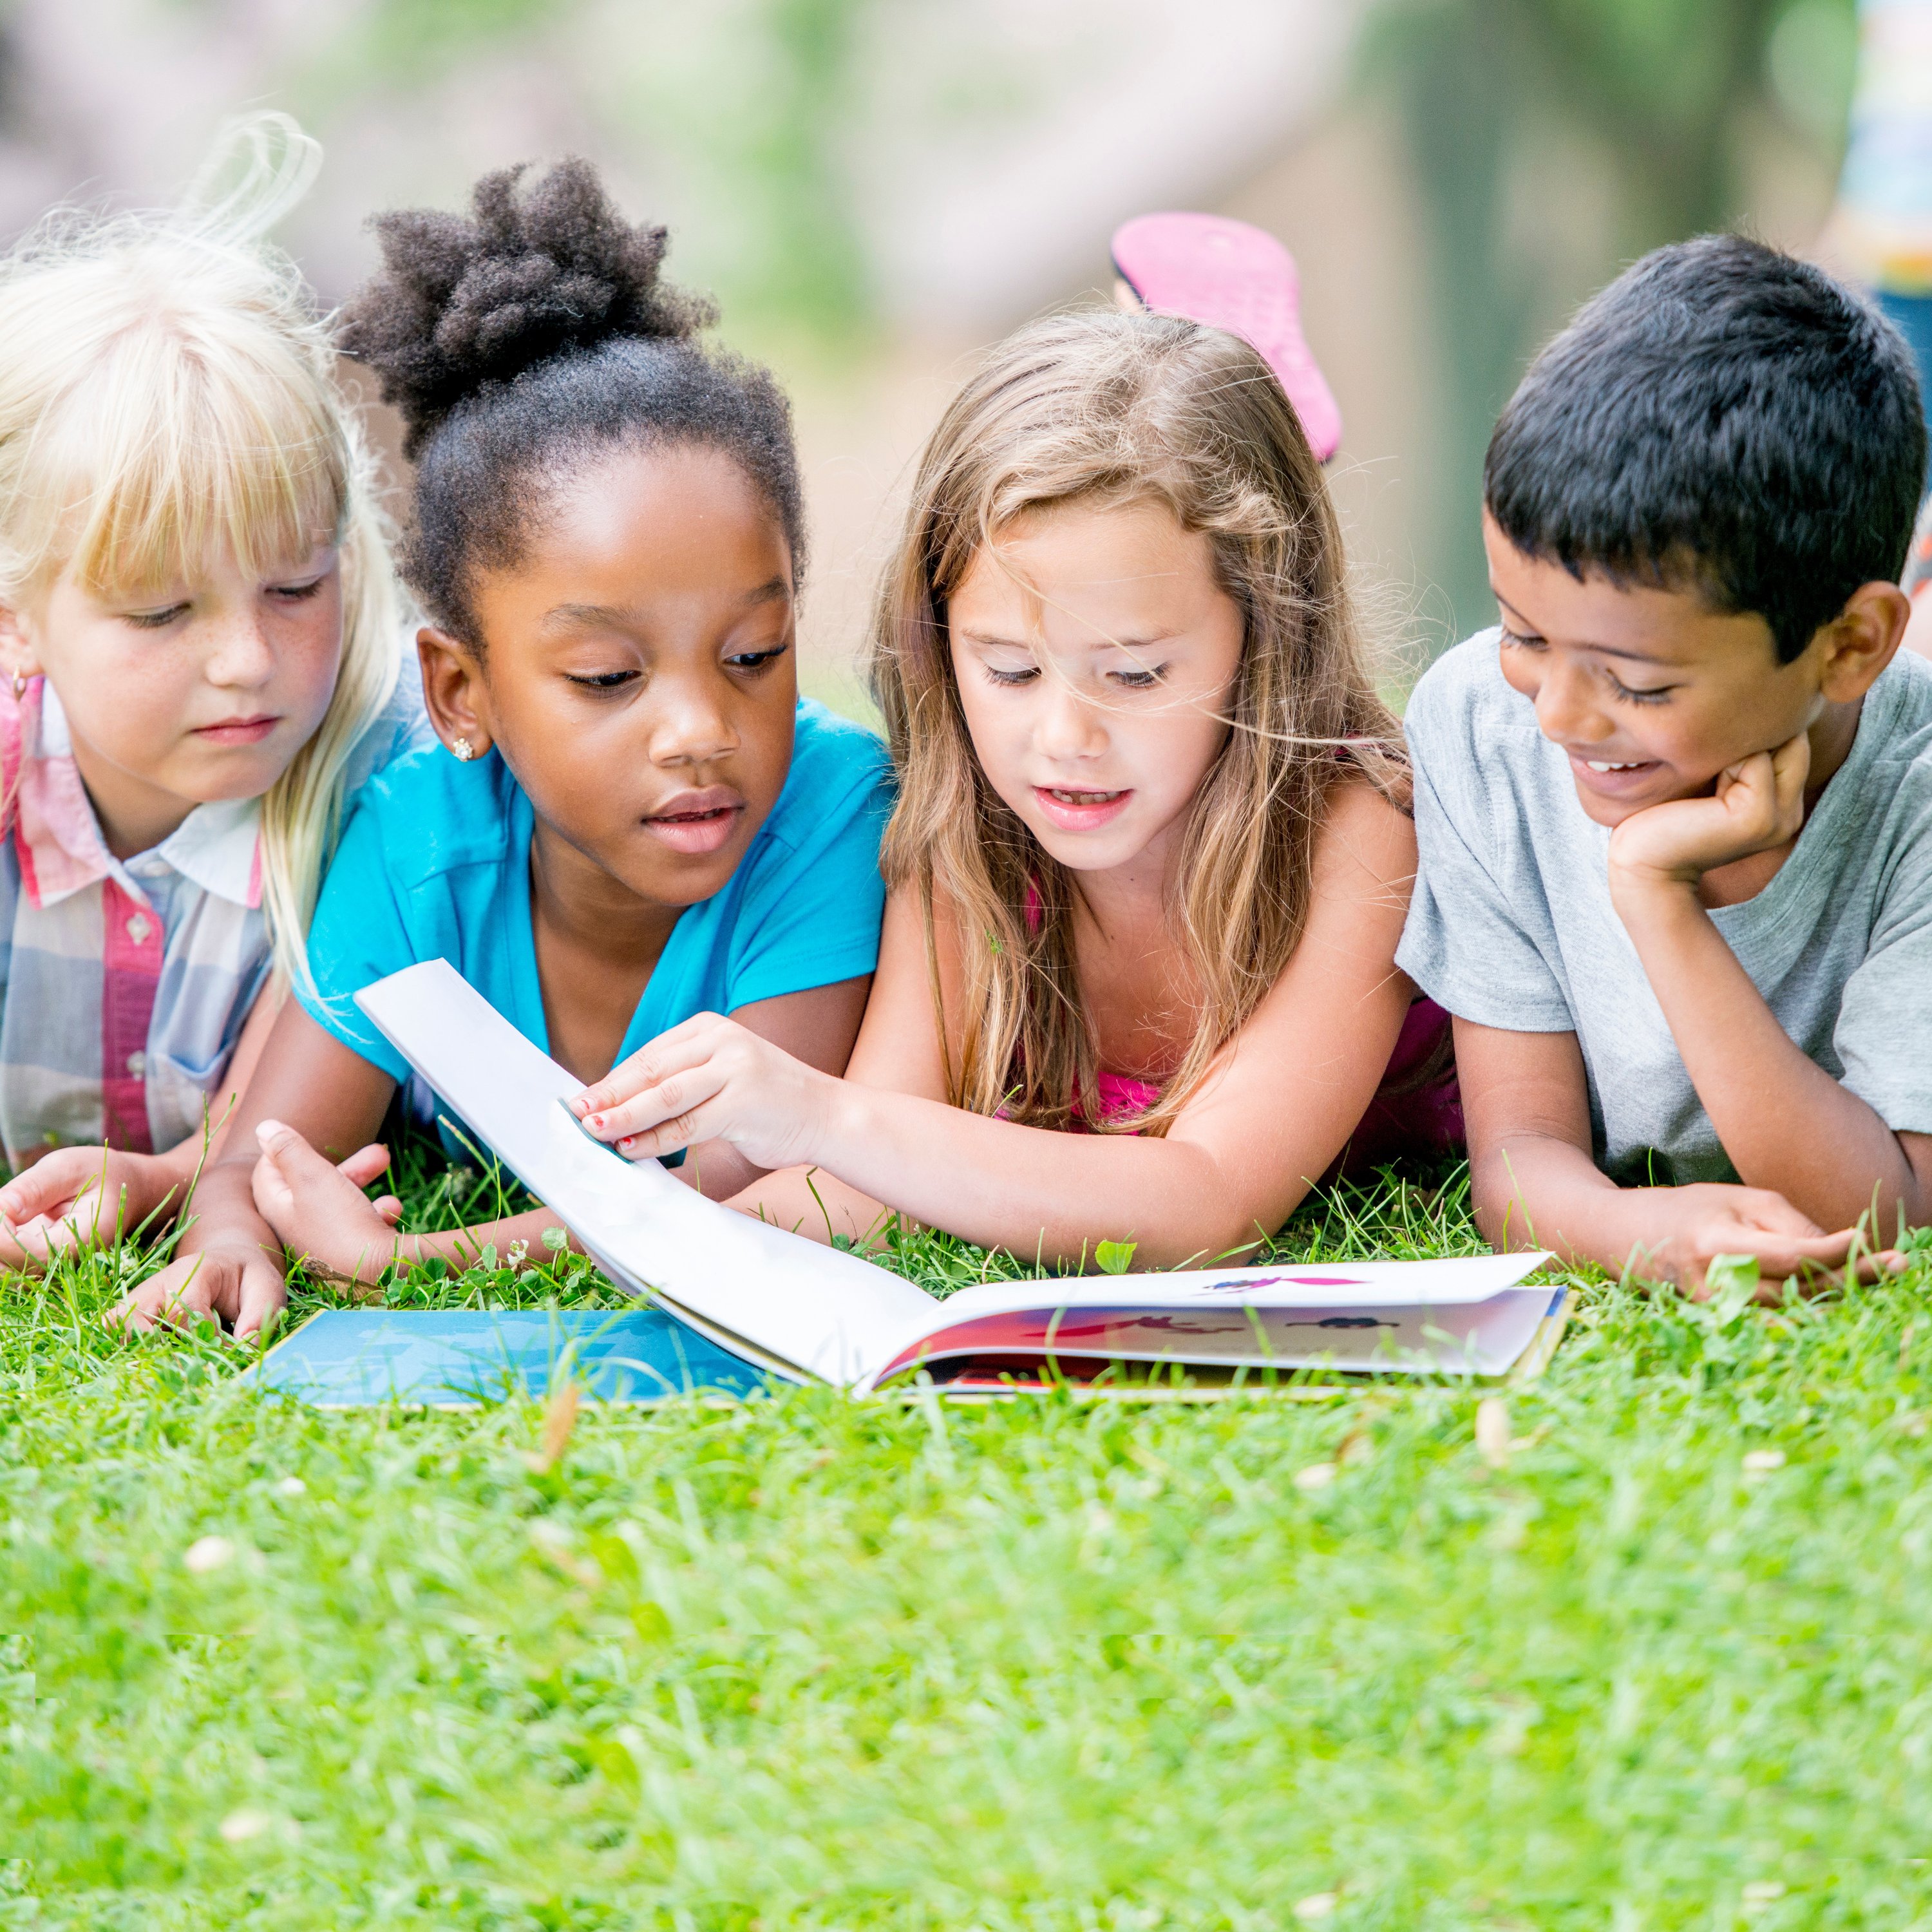 kids reading together in grass